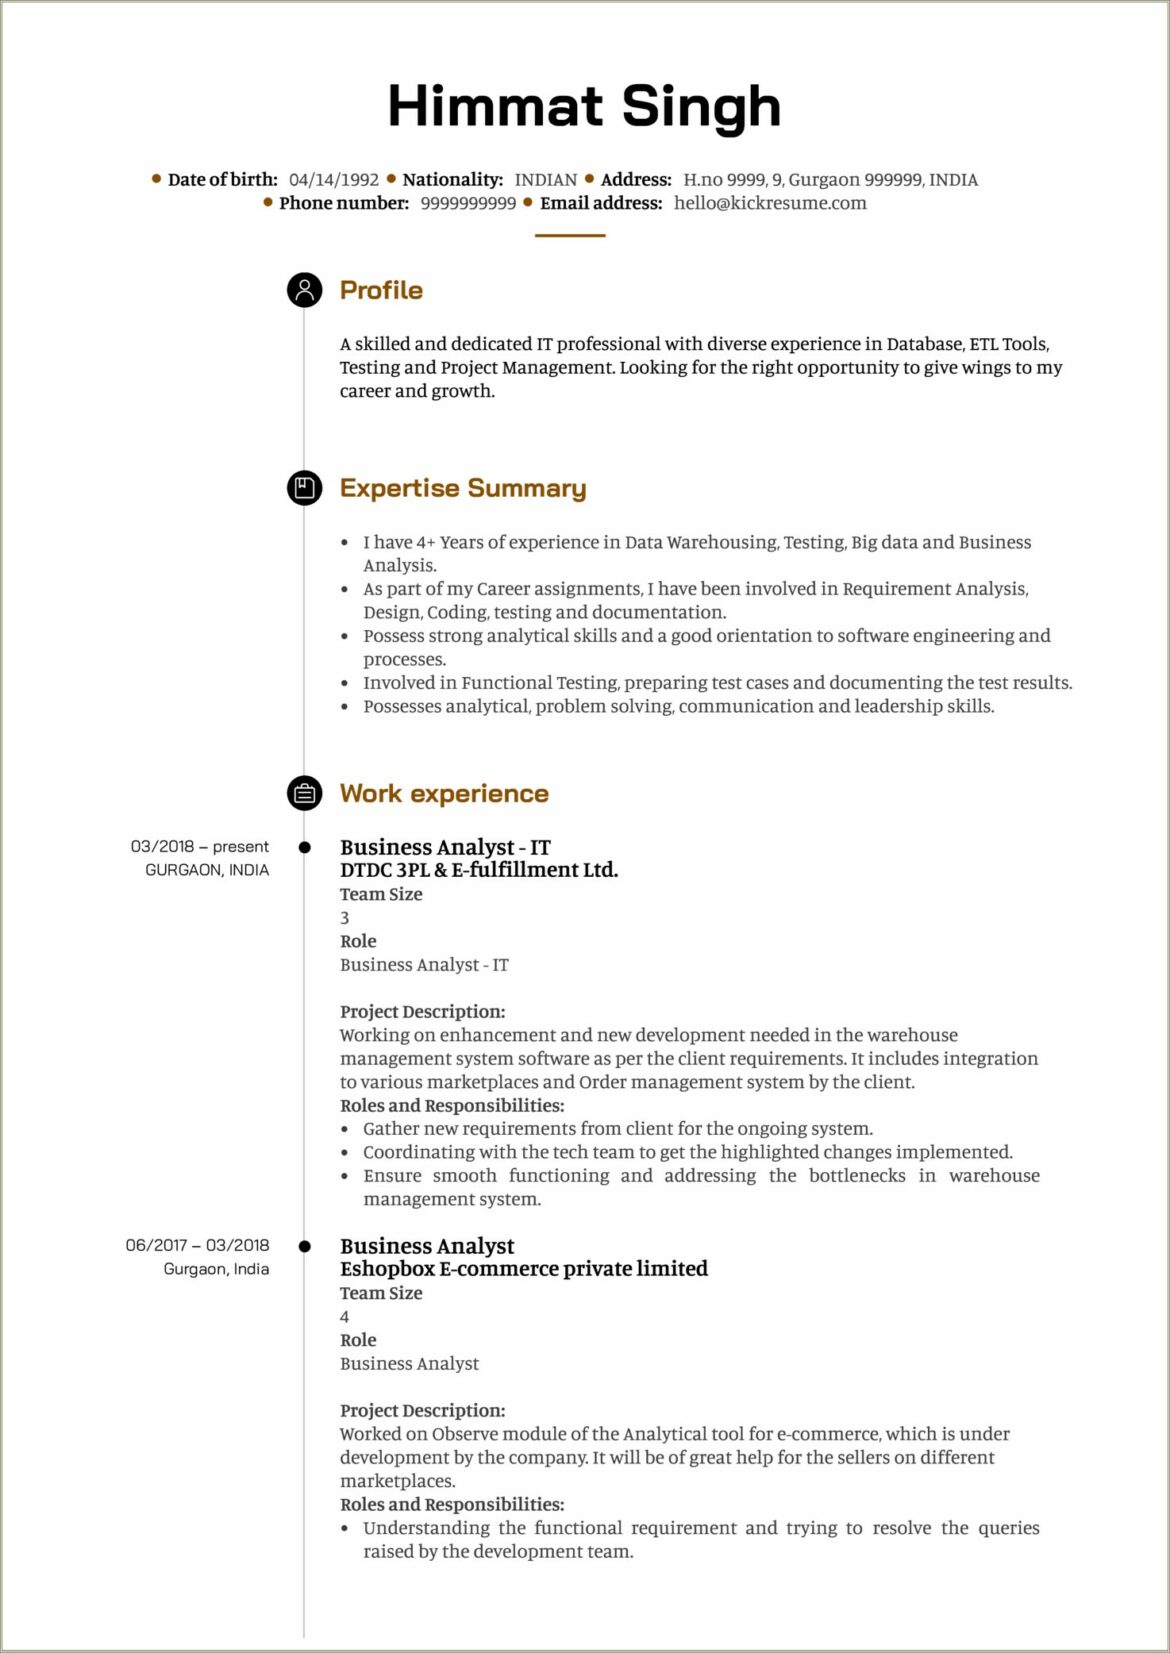 Sample Resume For Experienced Business Analyst